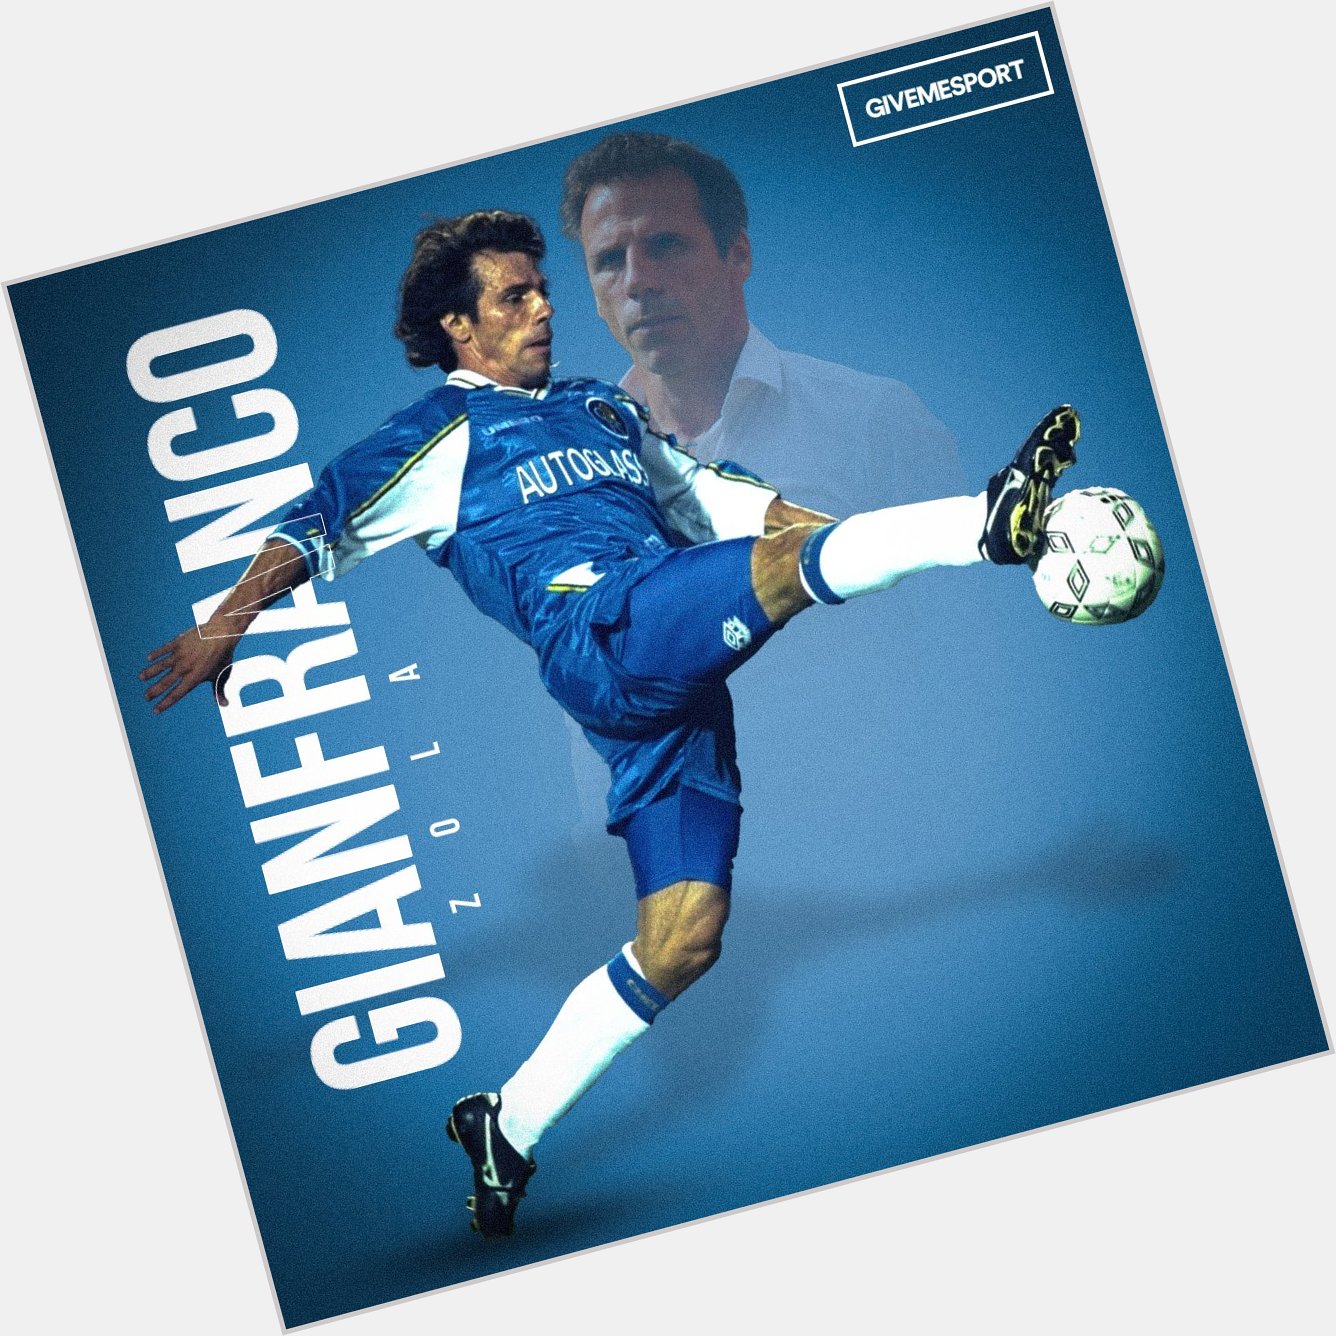 Happy birthday to Gianfranco Zola  One of the all-time greats  